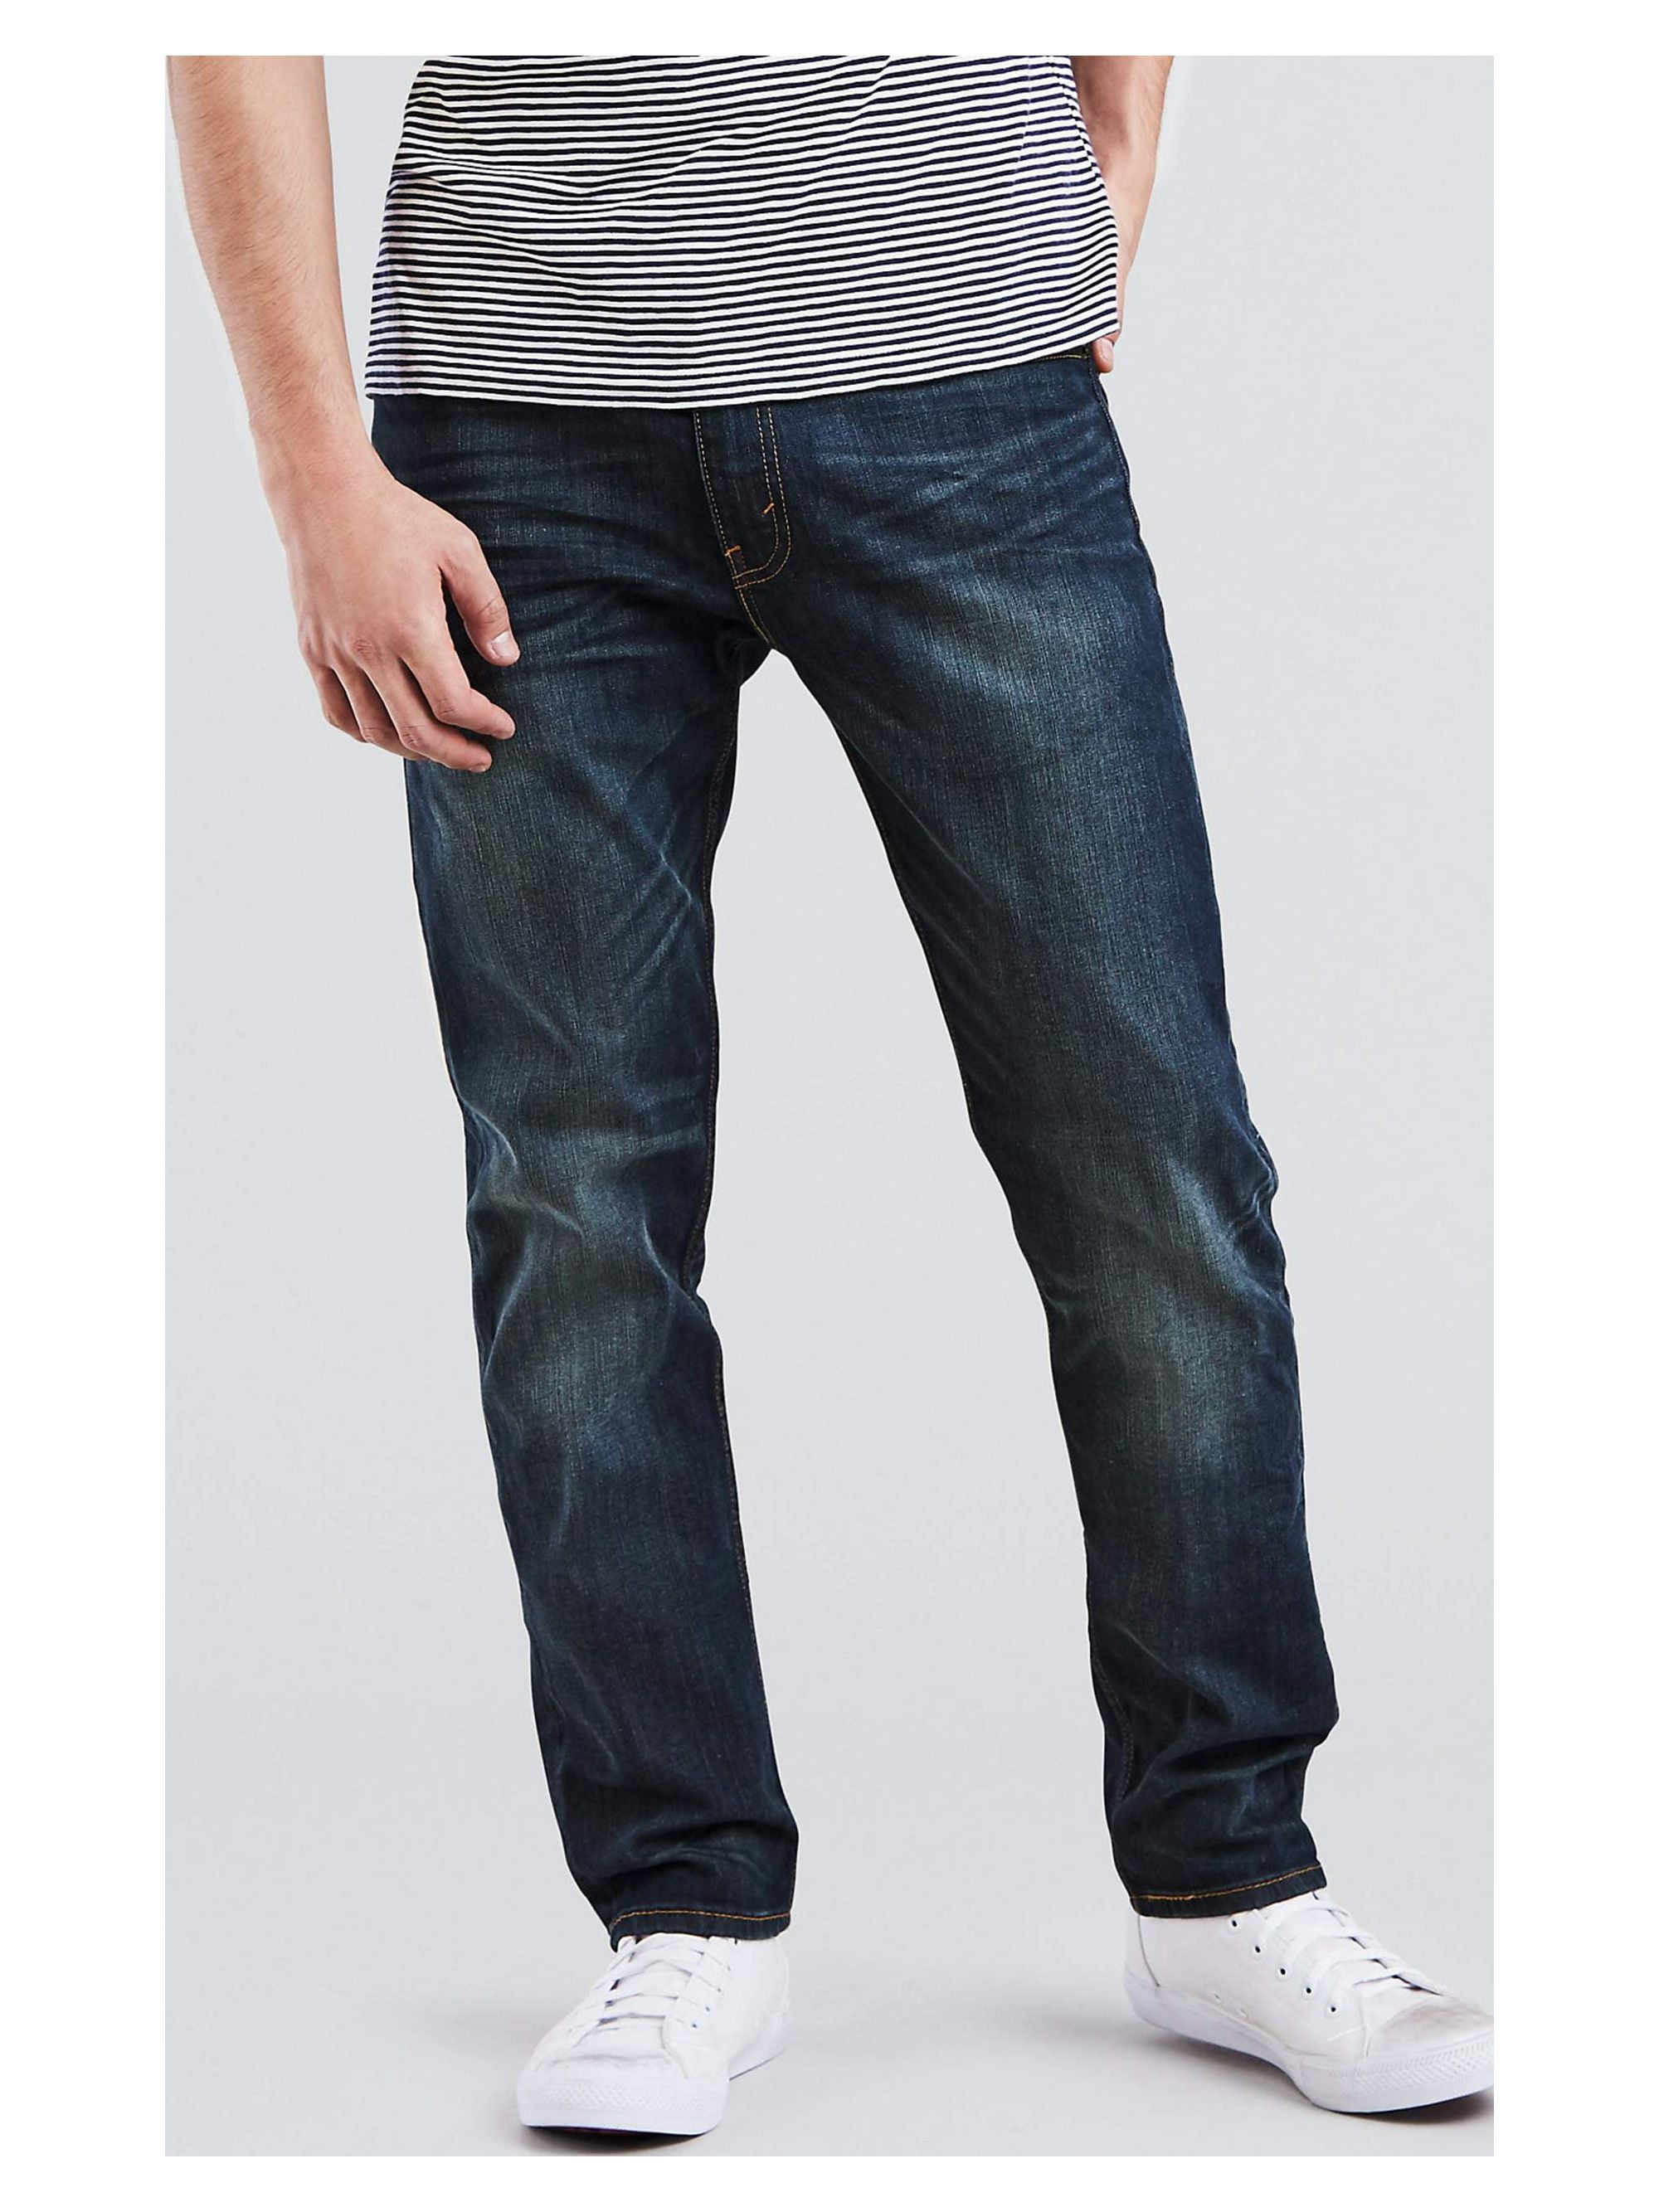 Levi's Buy Levi's Boys' 517 Bootcut Fit Jeans at Ubuy India